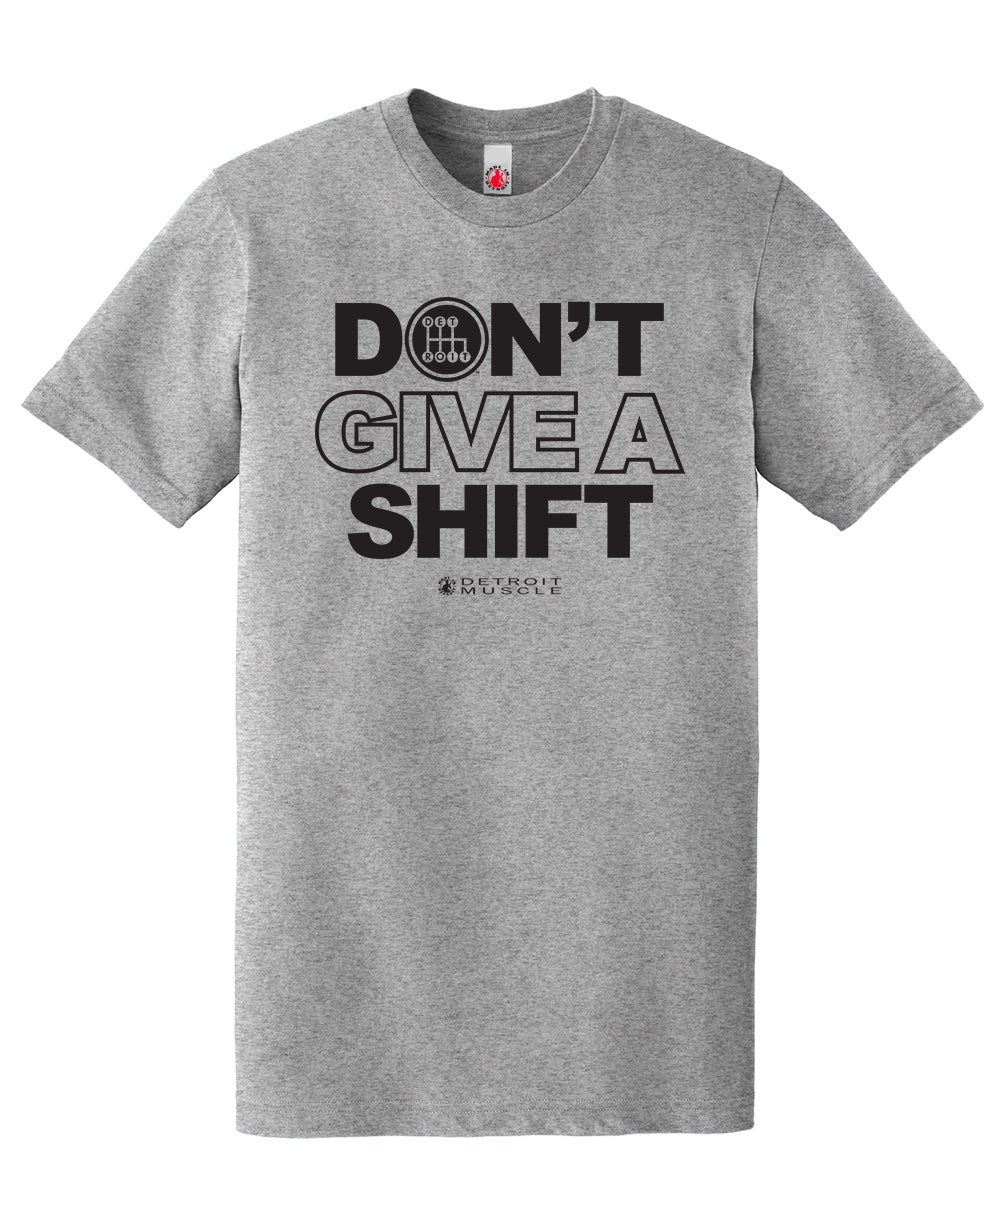 Don't Give a Shift